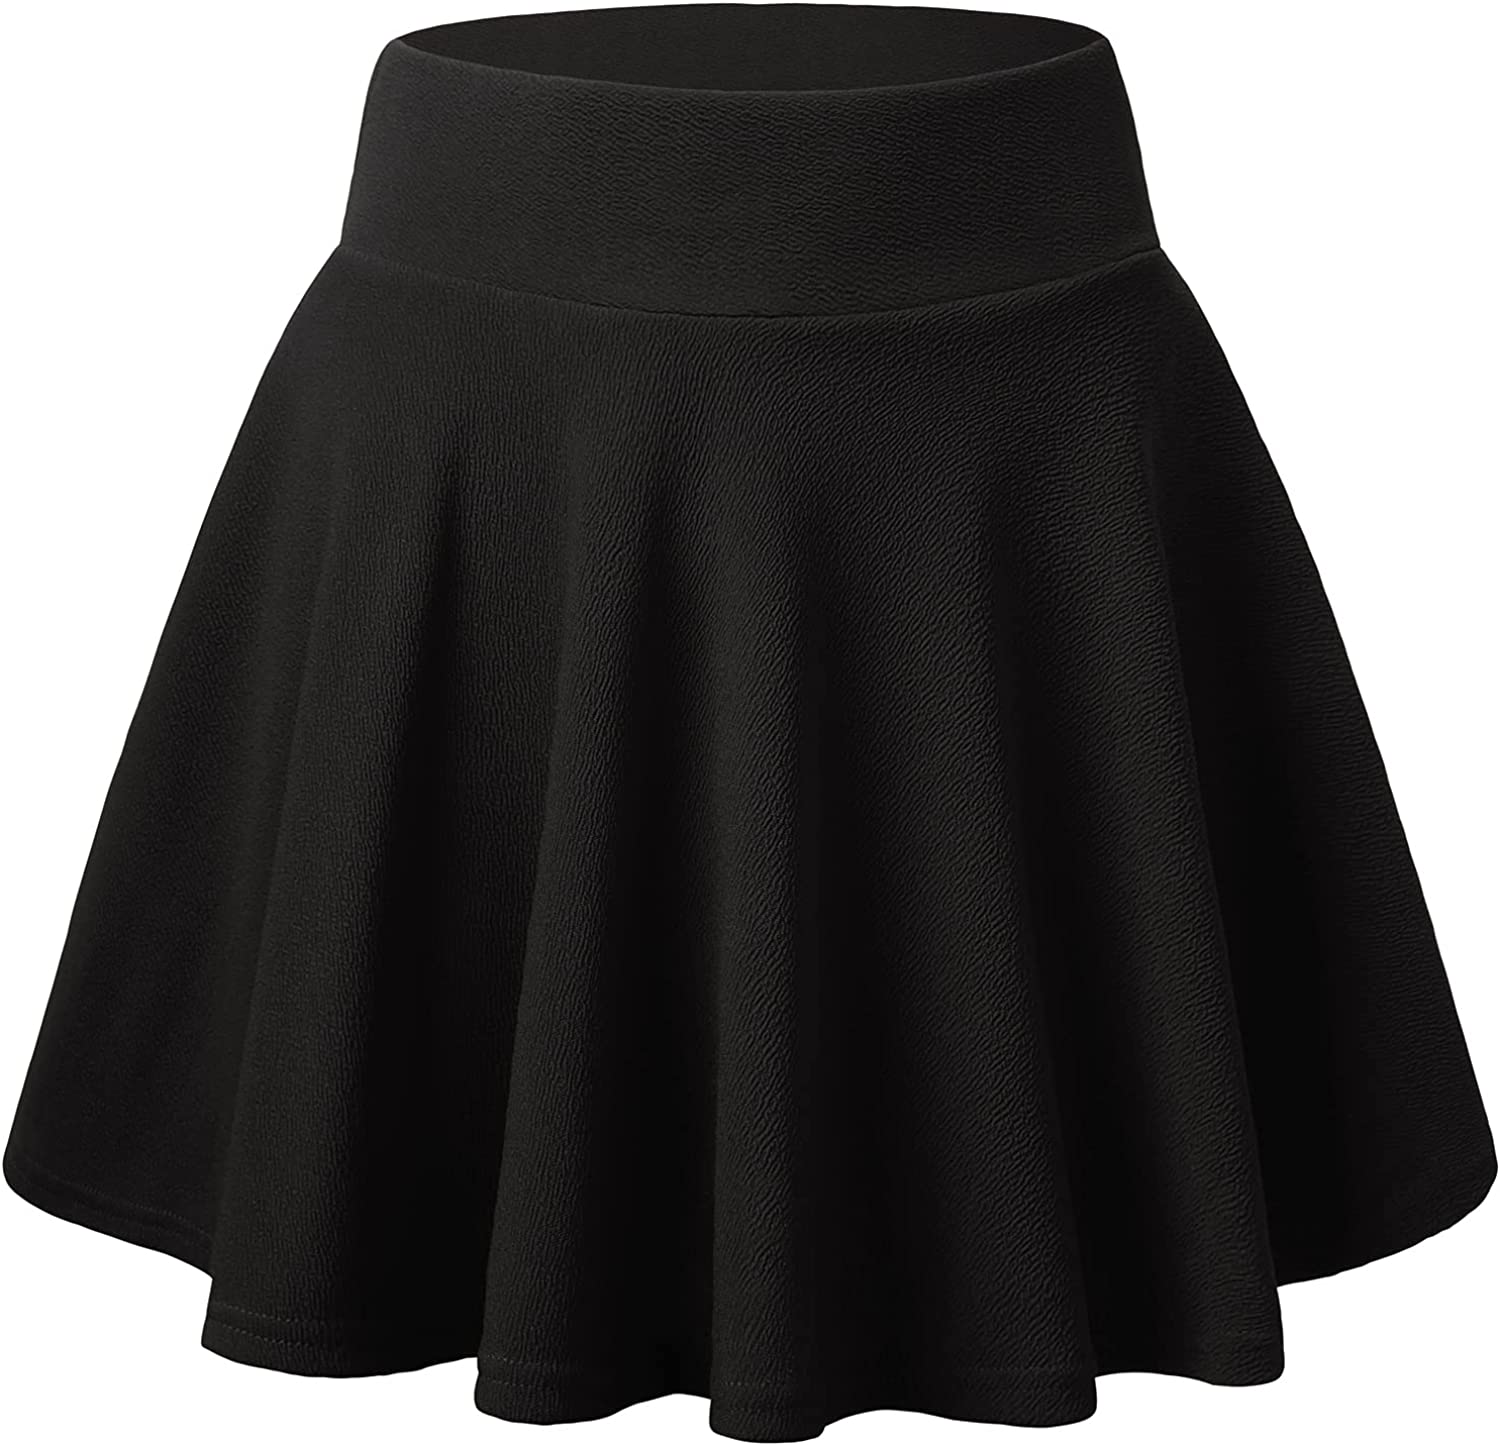 DJT FASHION Women's Casual Stretchy Flared Pleated Mini Skater Skirt ...